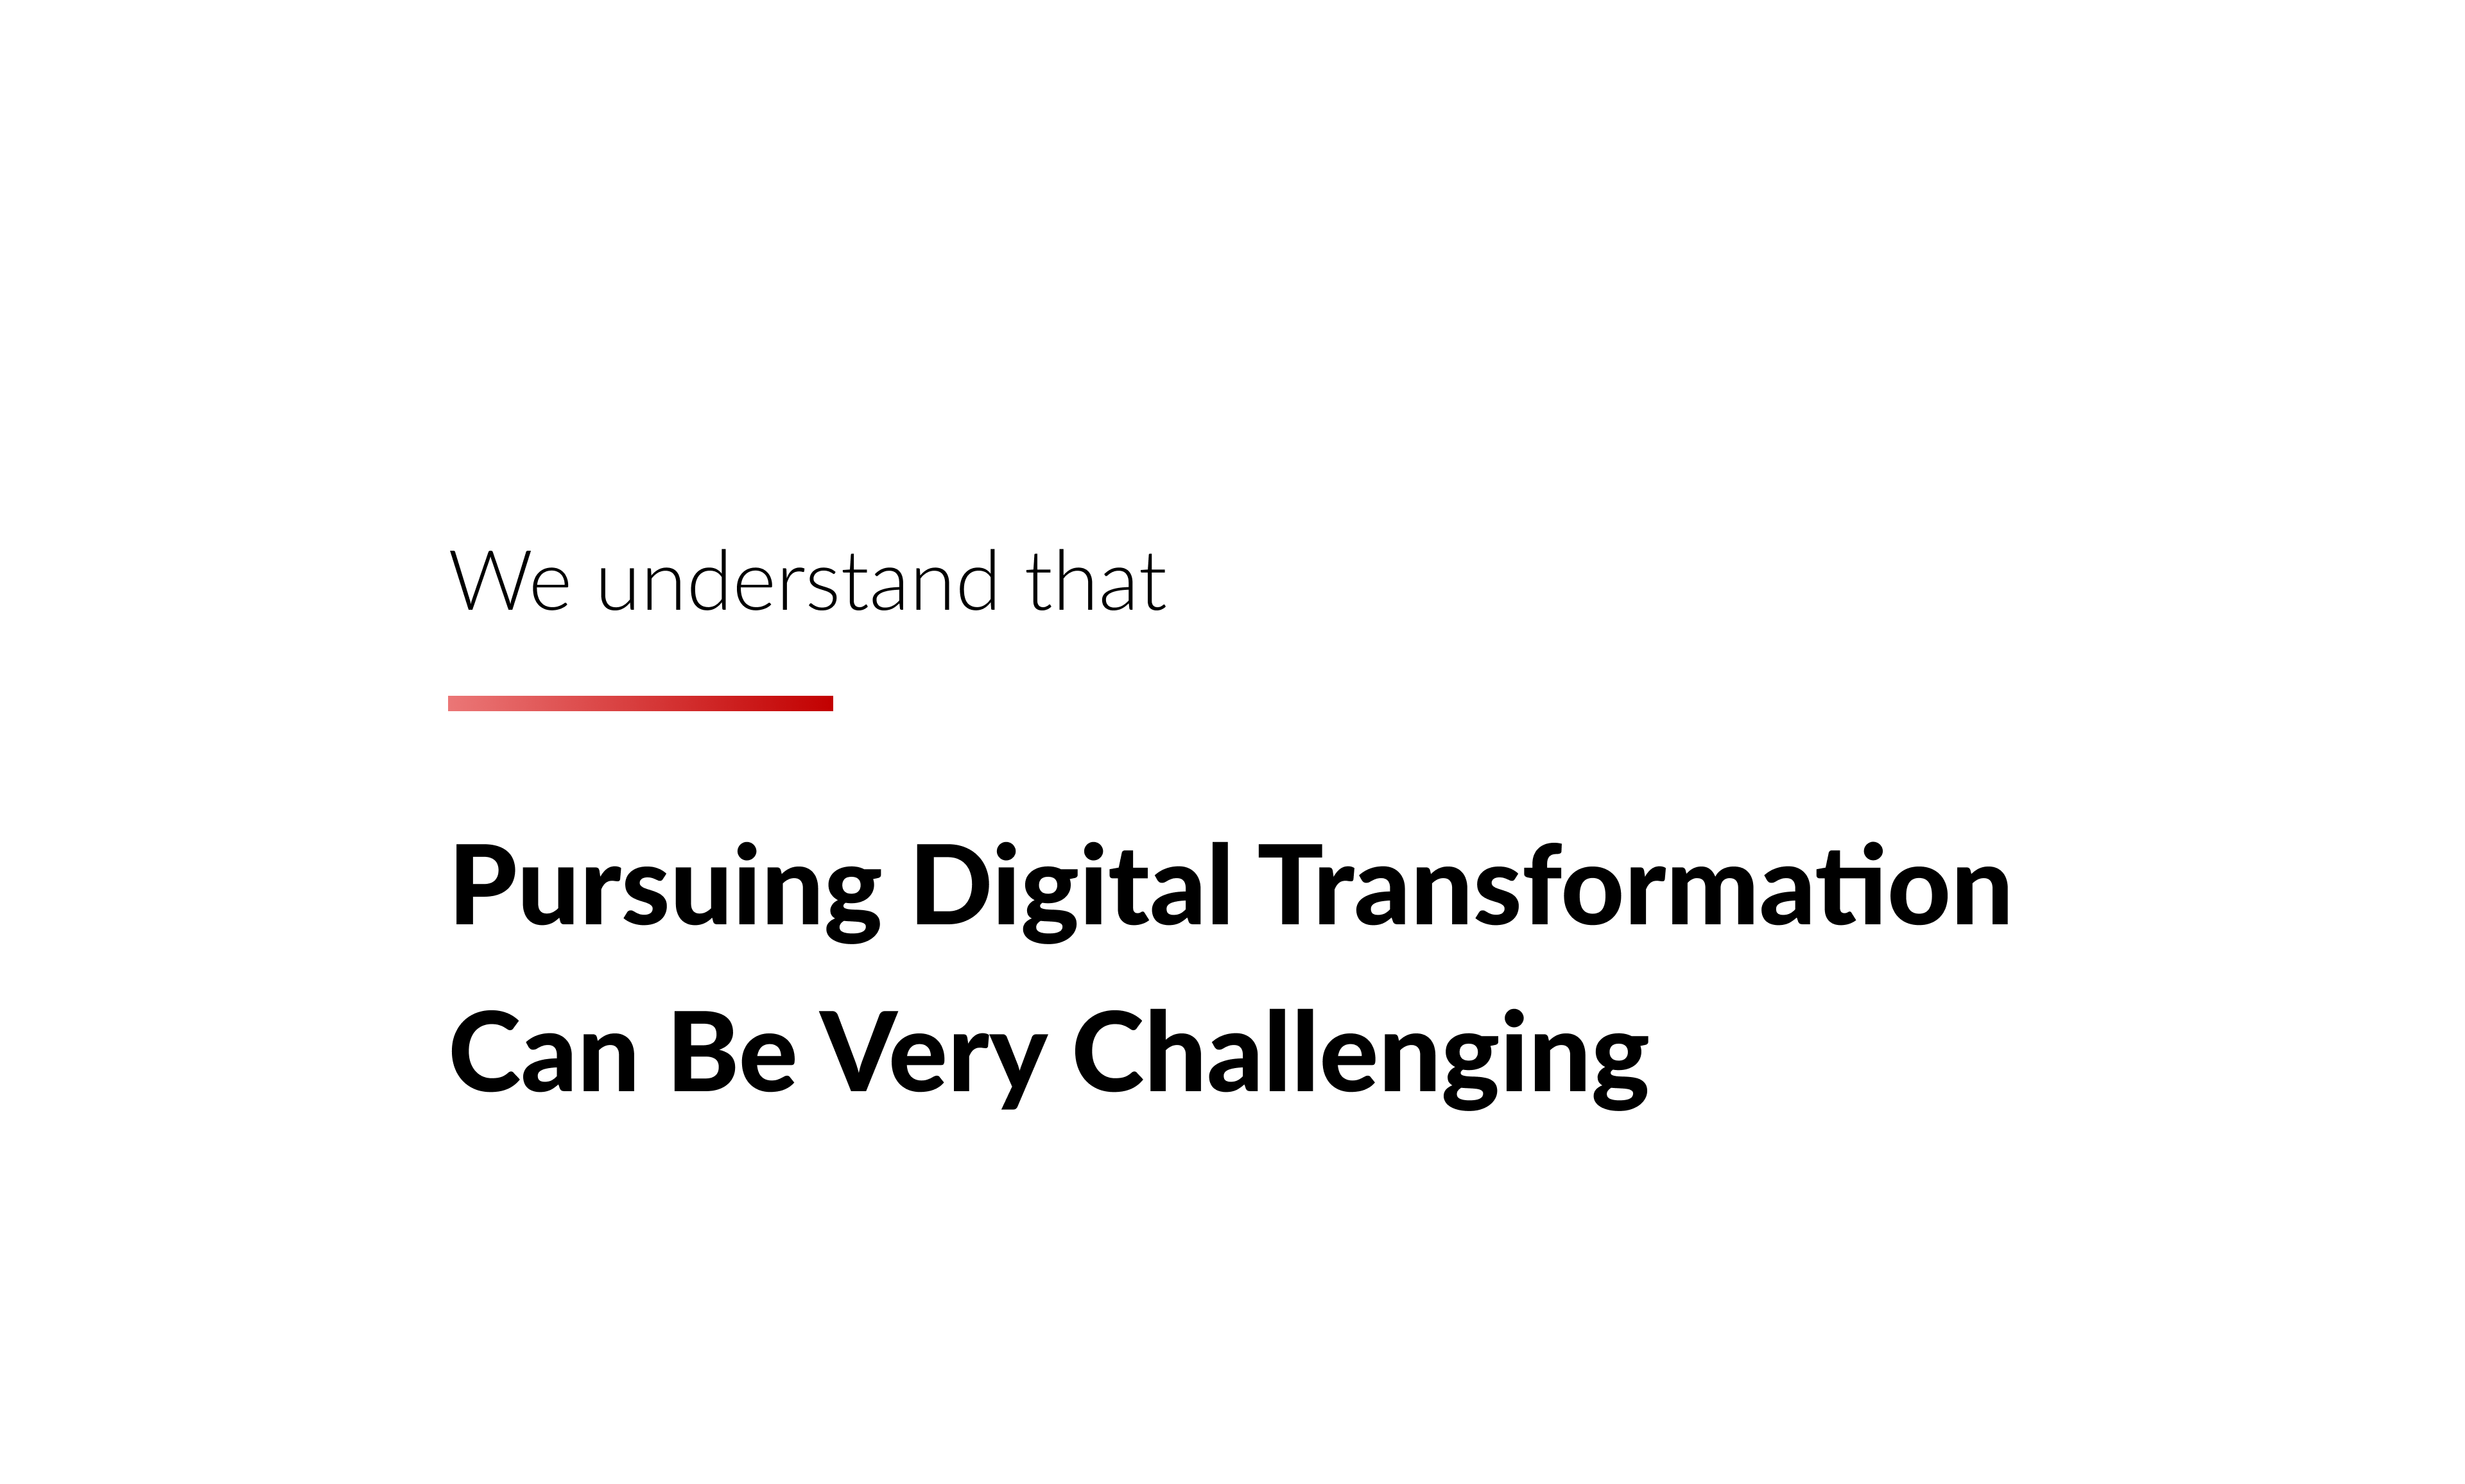 ITC understands that pursuing digital transformation in China can be very challenging